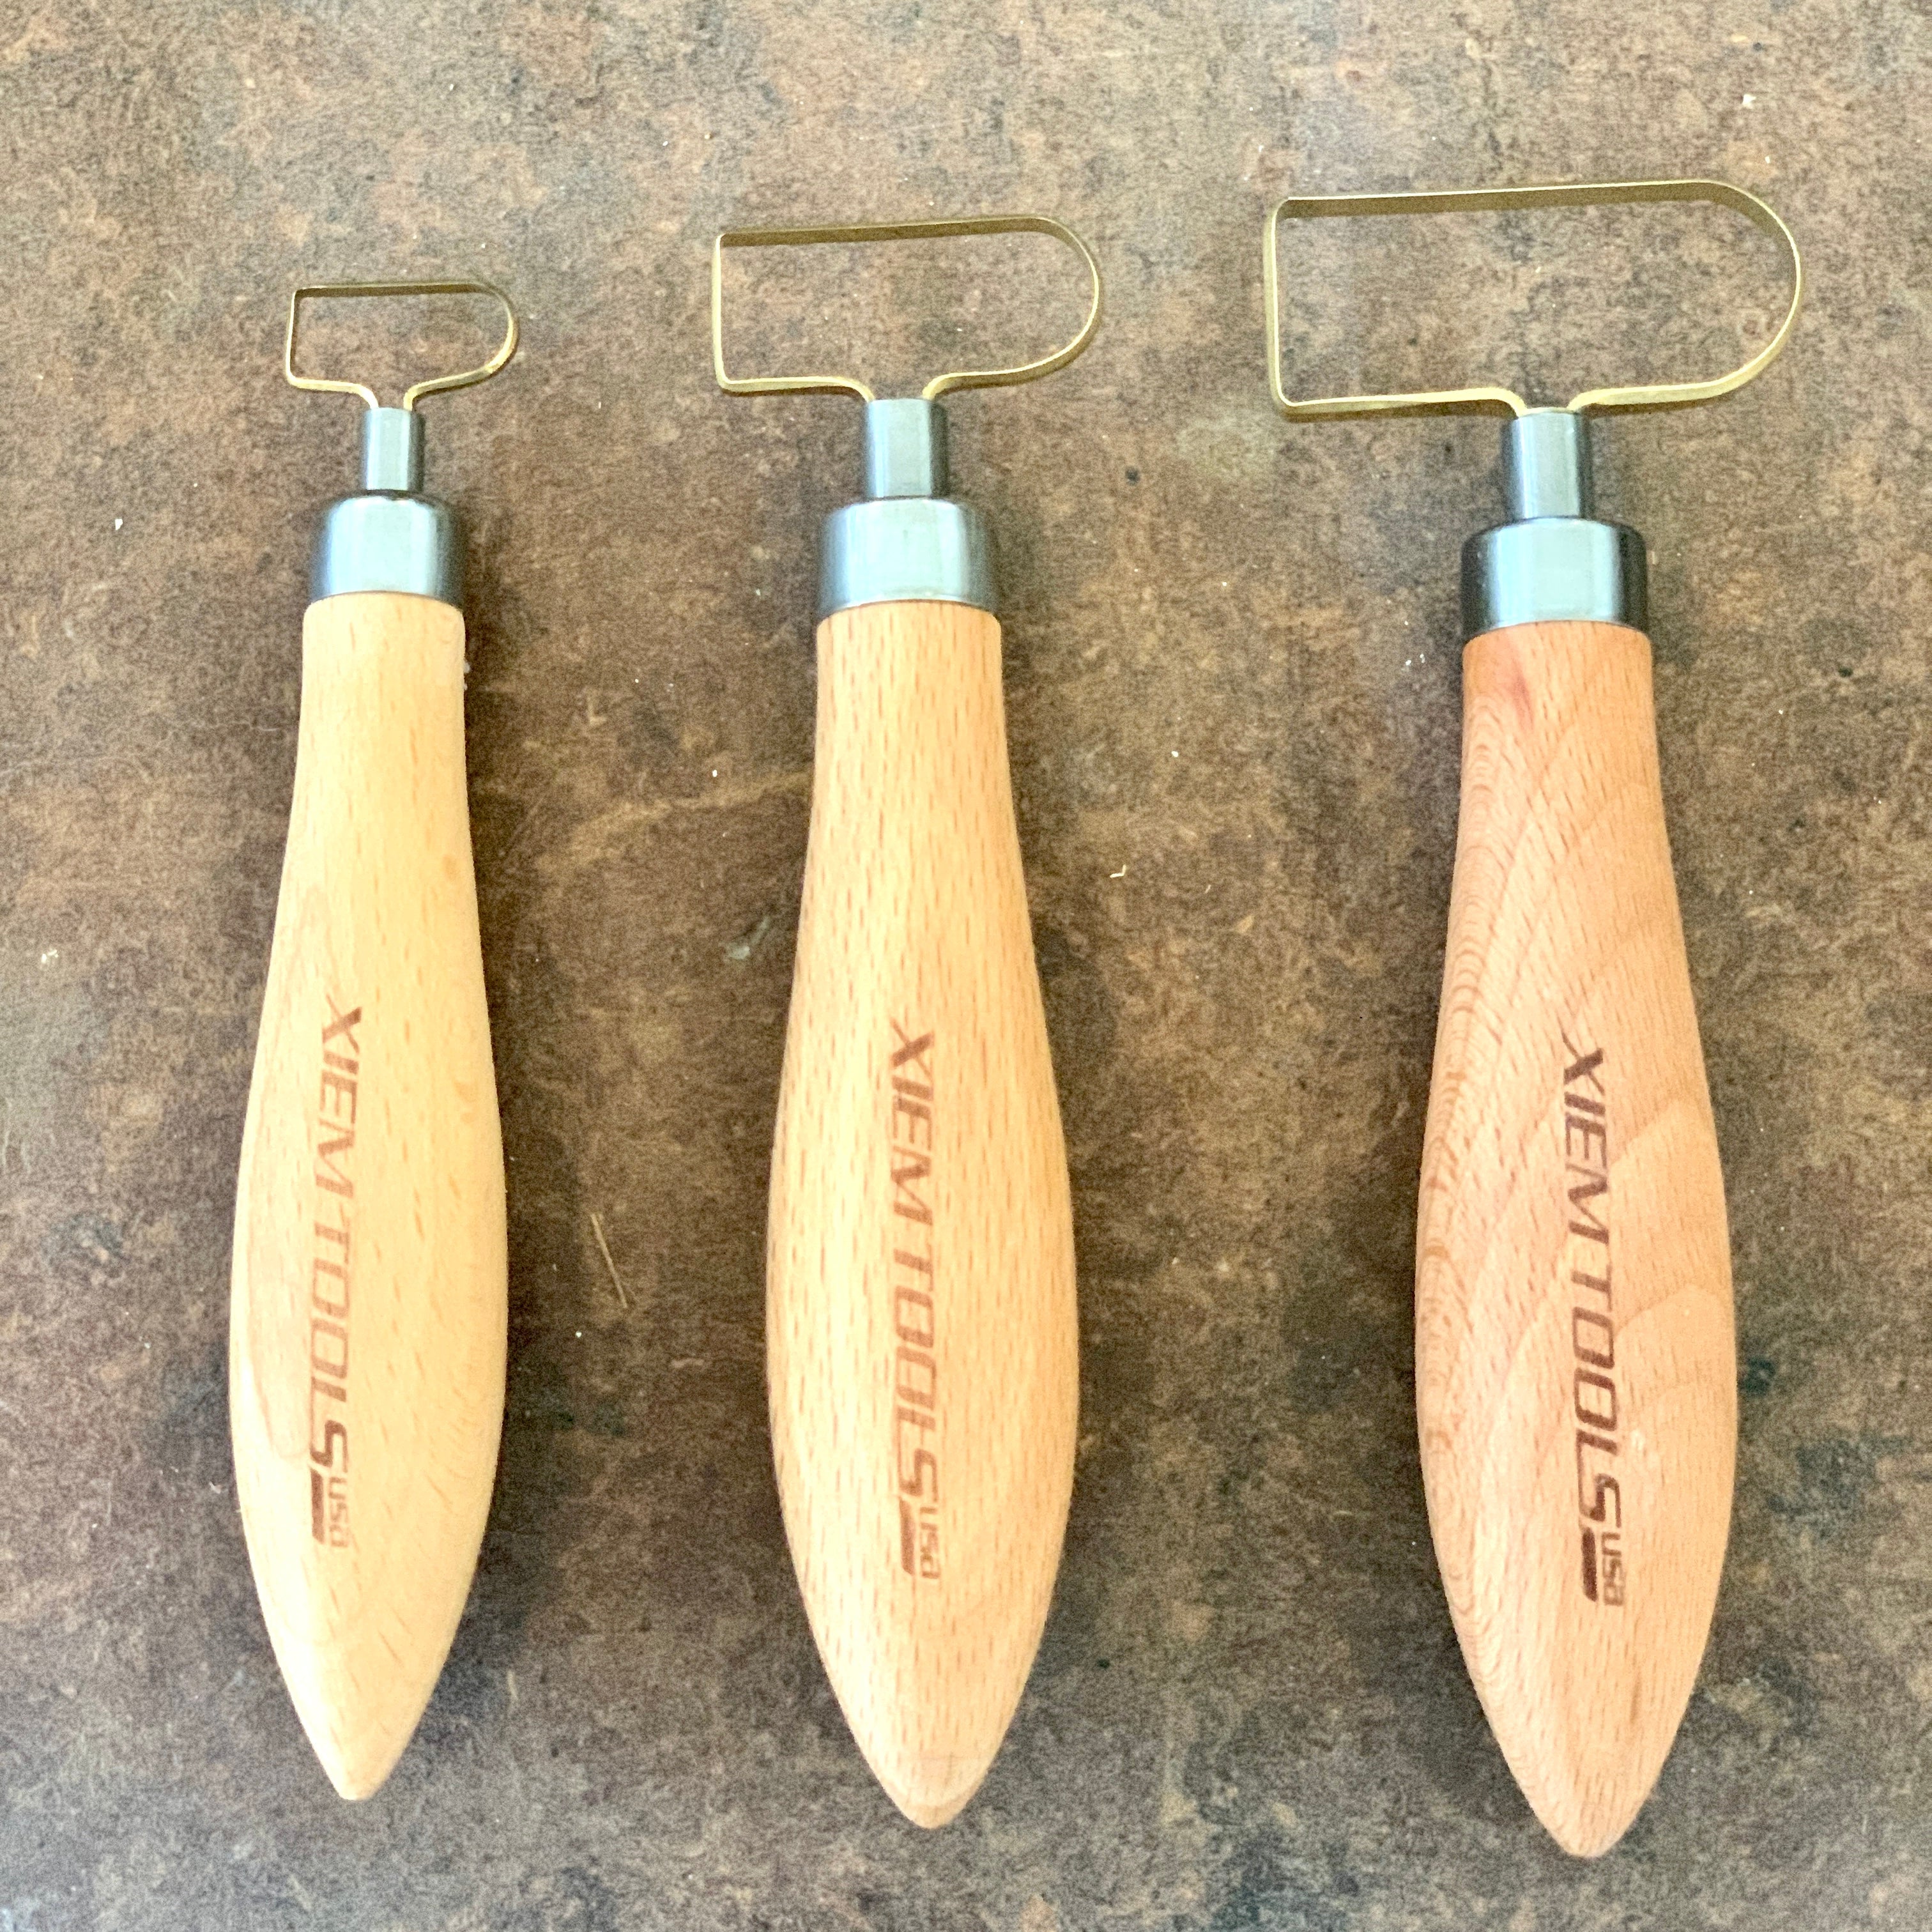 Rovin Ceramics - Some of our favorite Xiem tools! These hand-forged  stainless steel tools are great for trimming, scoring, marking, and more! # xiem #usa #ceramics #tools #pottery #claytools #pots #ceramicart #art  #steel #